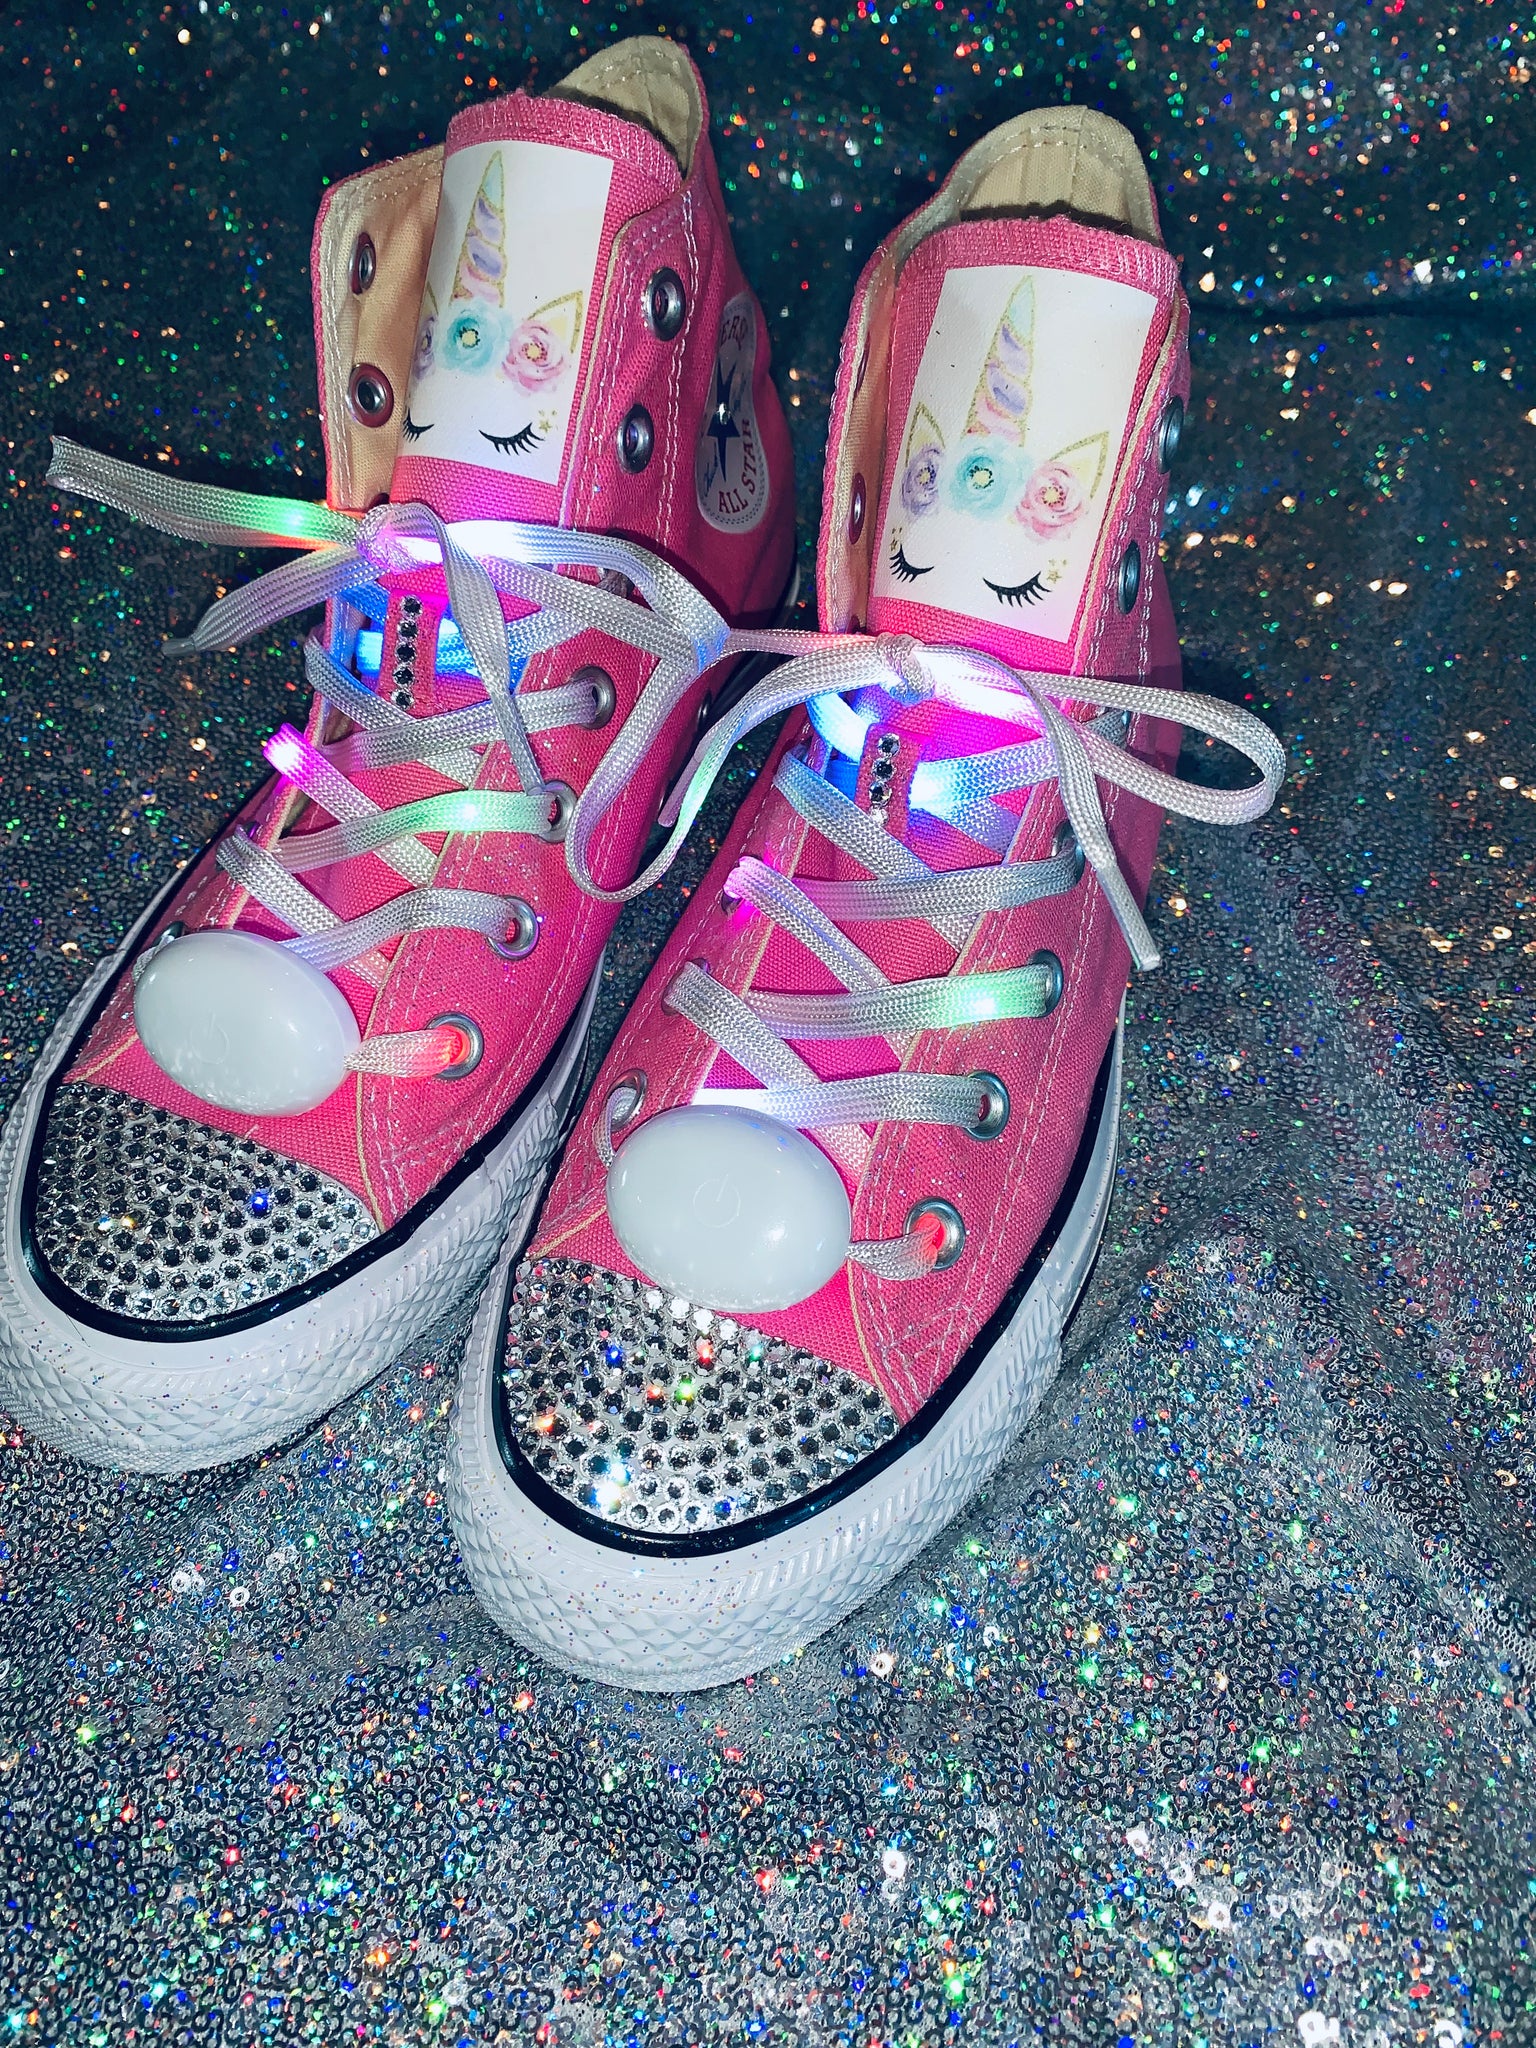 light up converse for adults